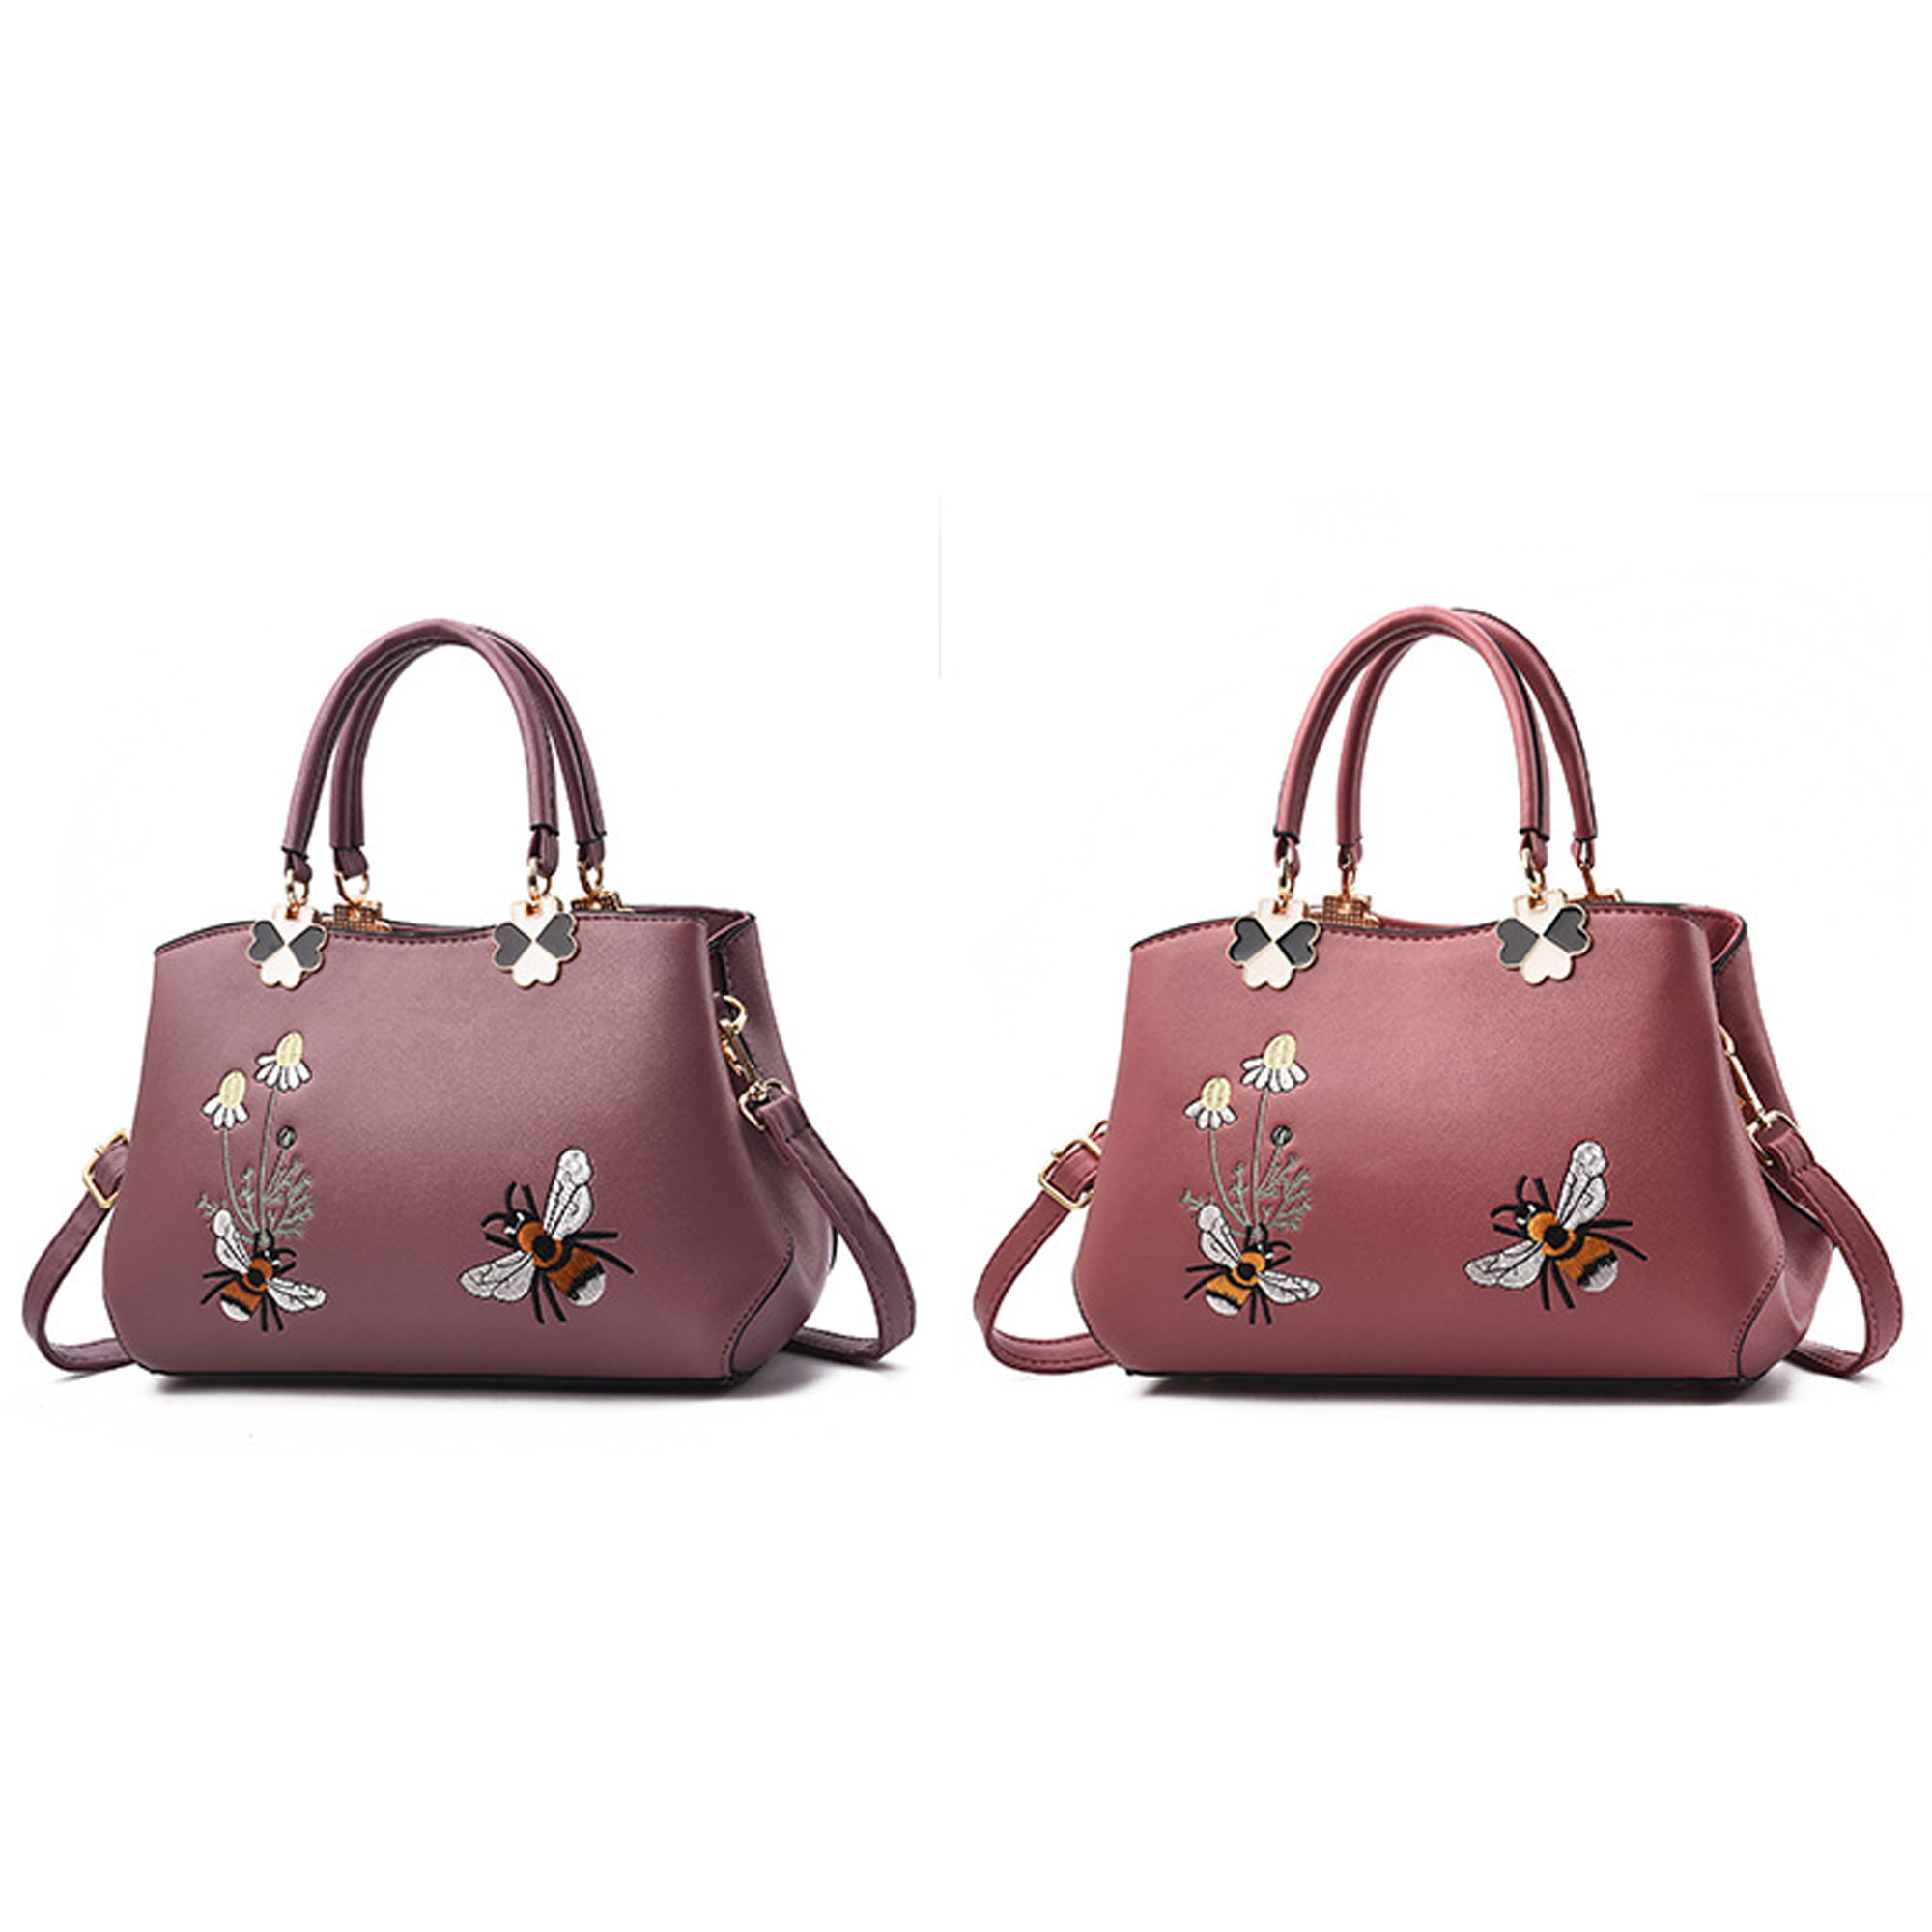 Women Leather Handbags Luxury Ladies Hand Bags Purse Fashion Embroidery Shoulder  Bags,Violet 